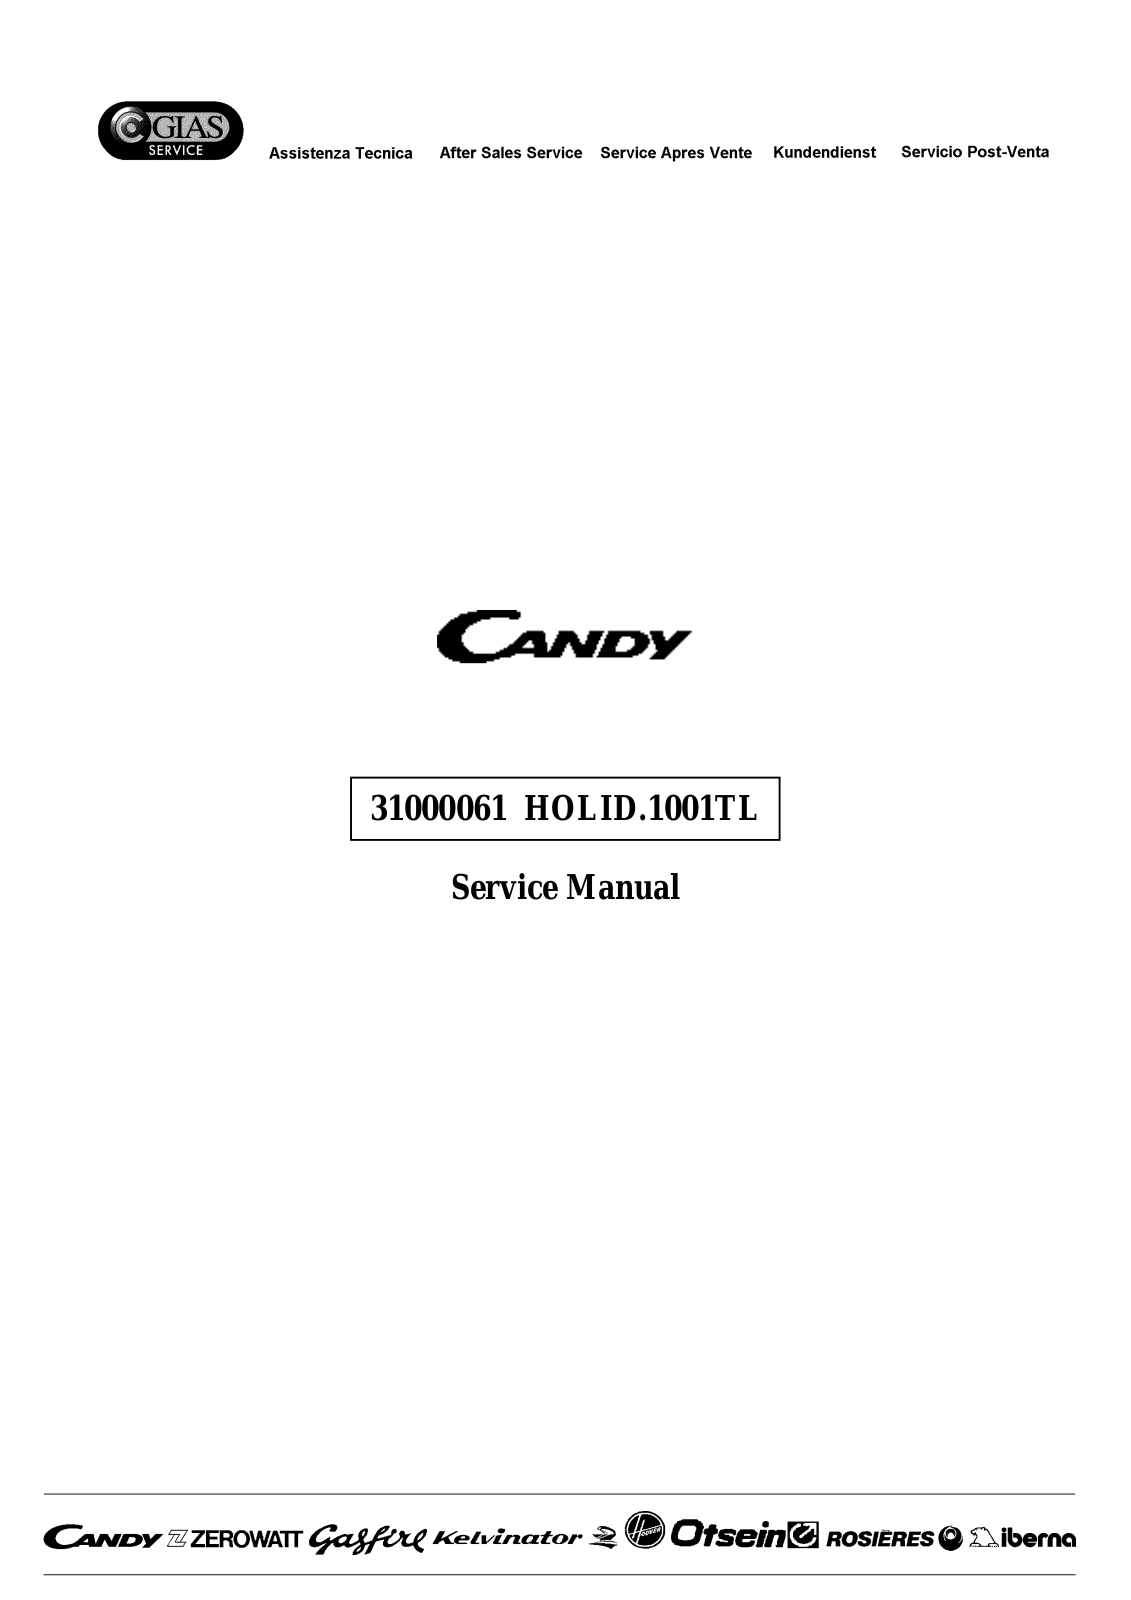 Candy 31000061 HOLID.1001TL Service Manual